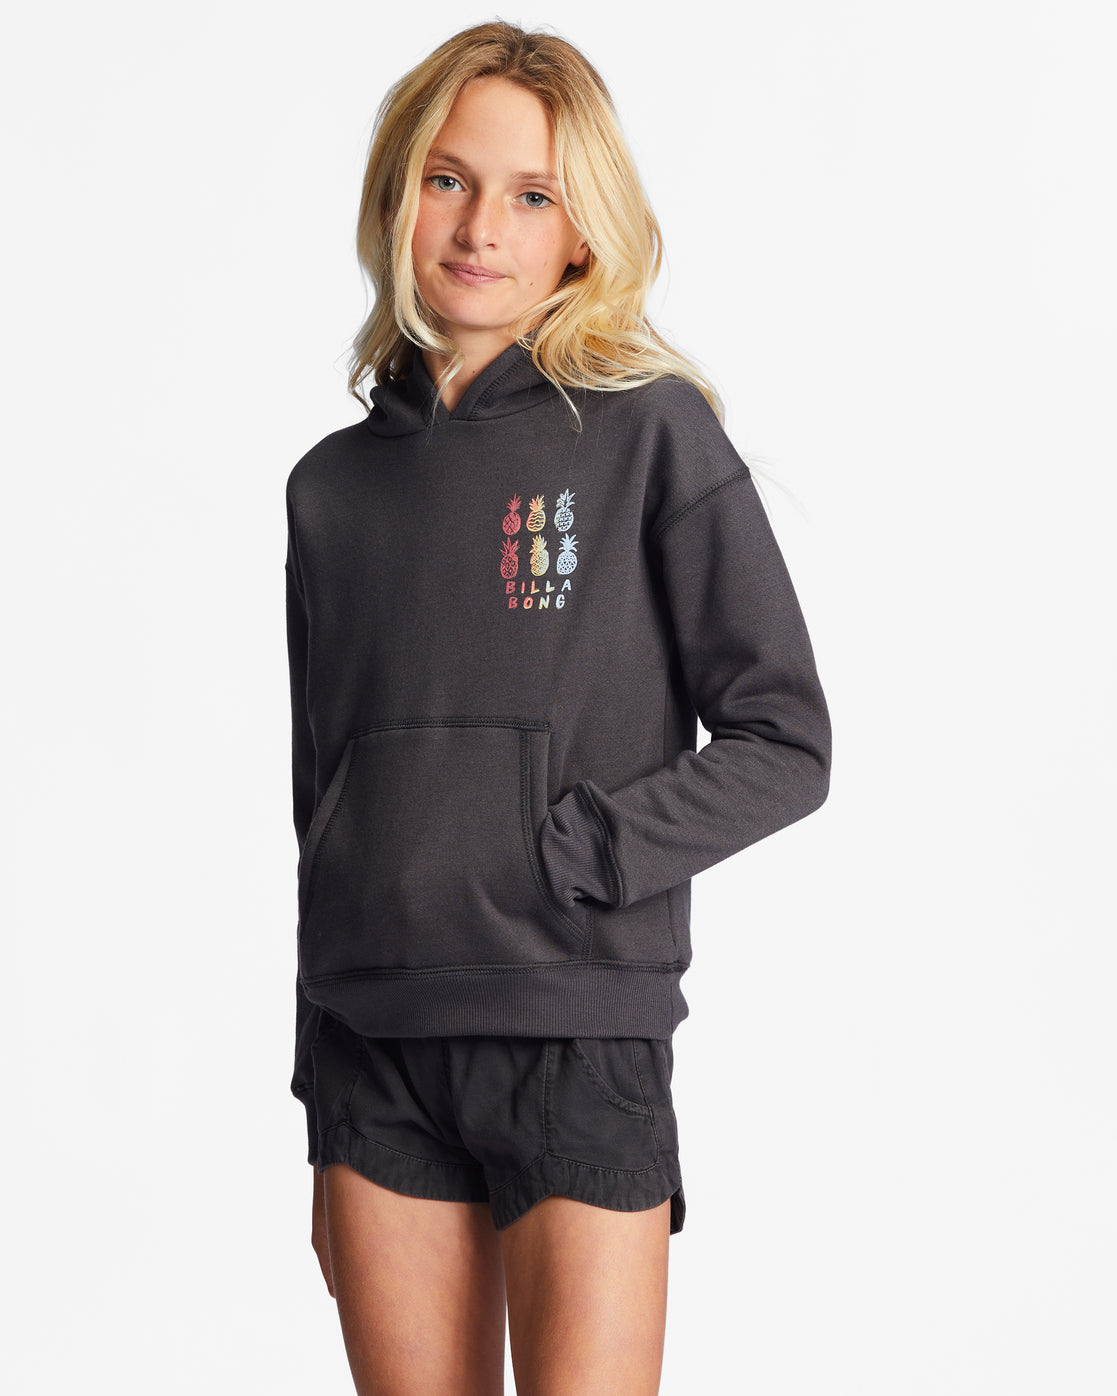 Girls Good Days Ahead Pullover - Off Black